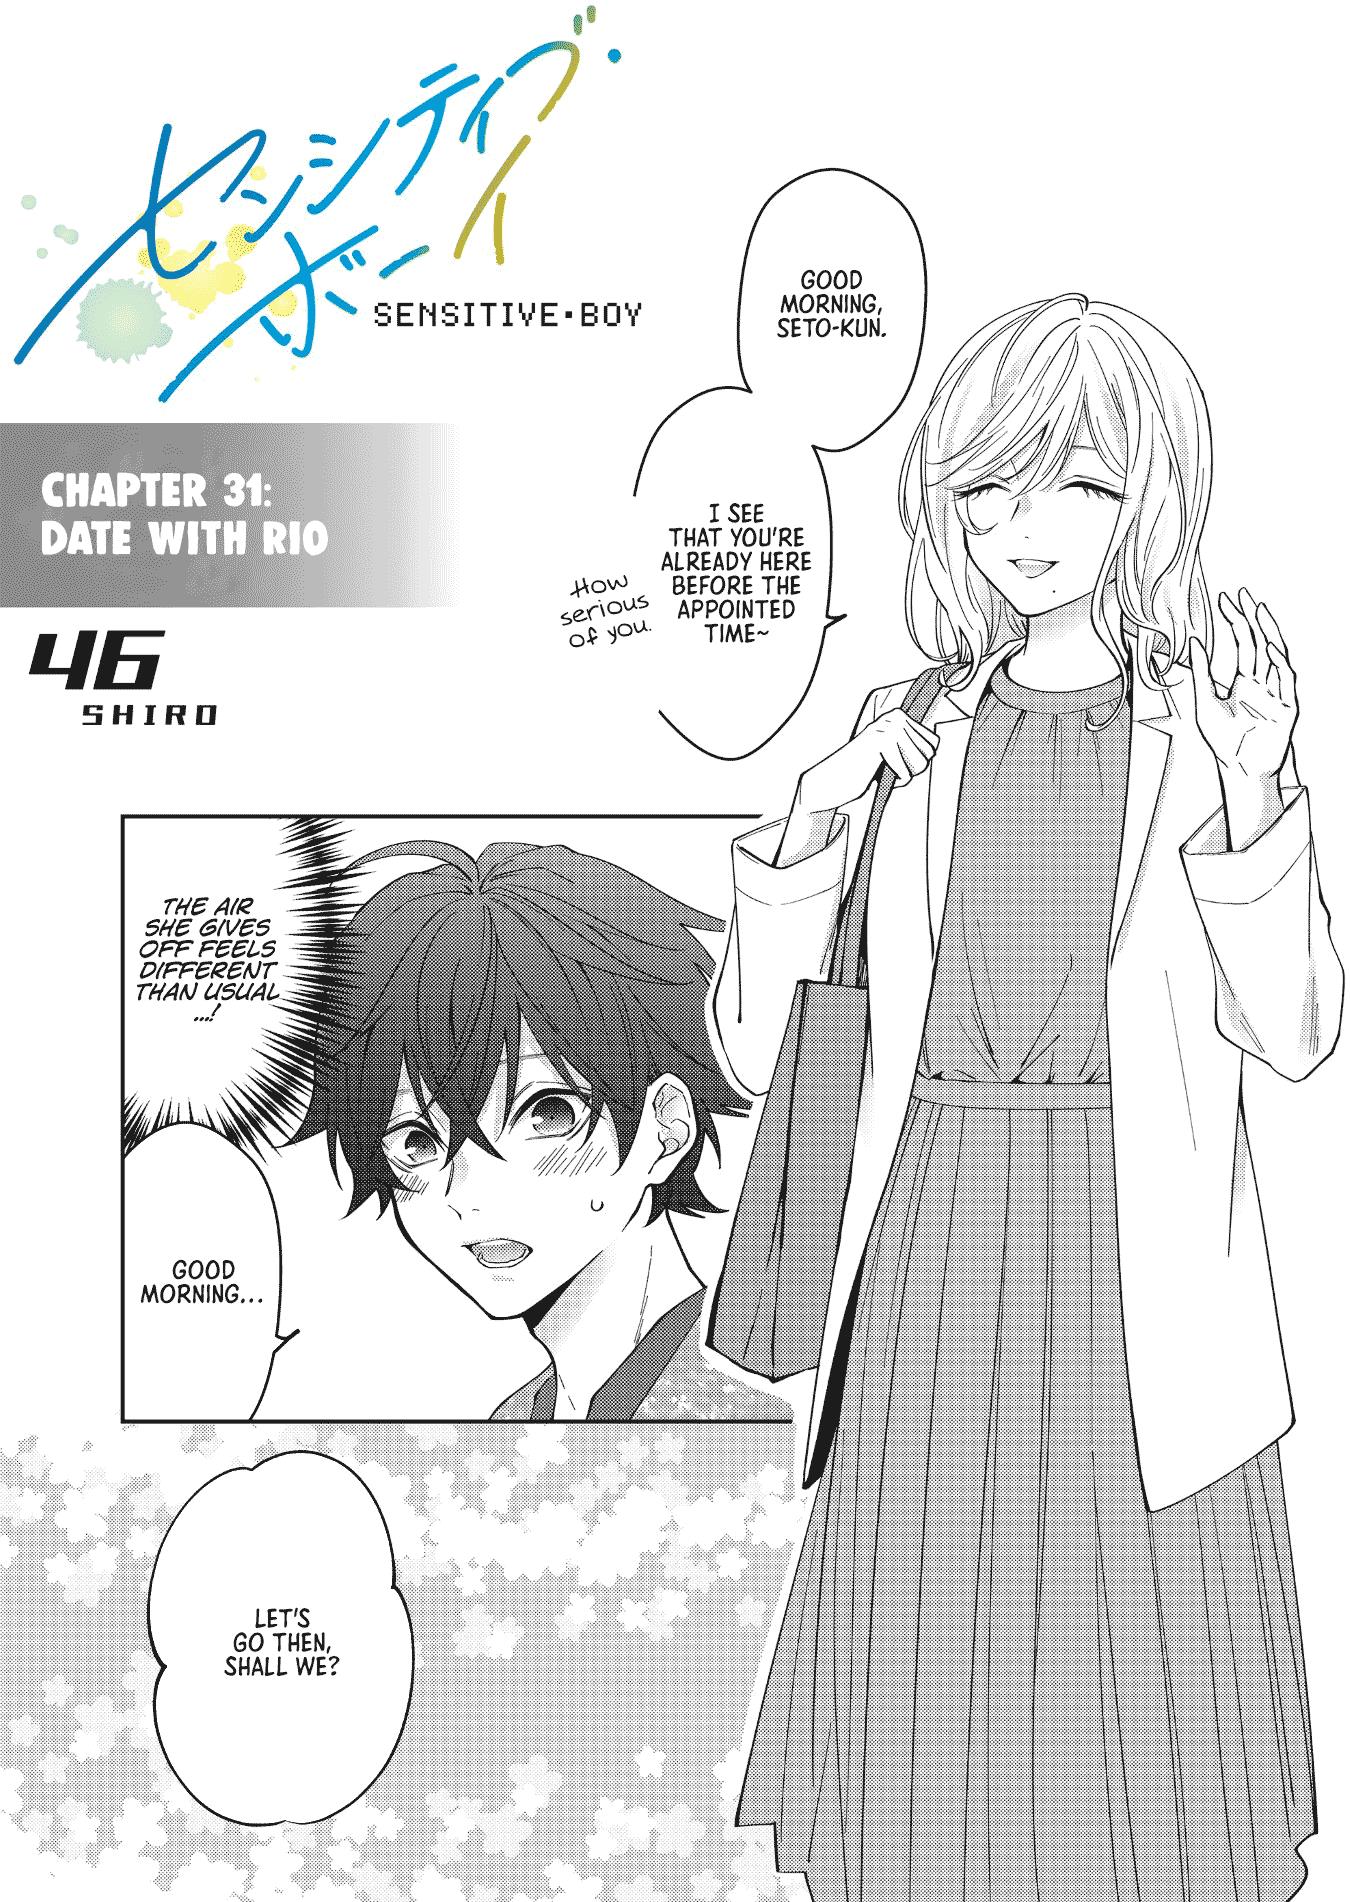 Sensitive Boy Chapter 31: Date With Rio - Picture 1